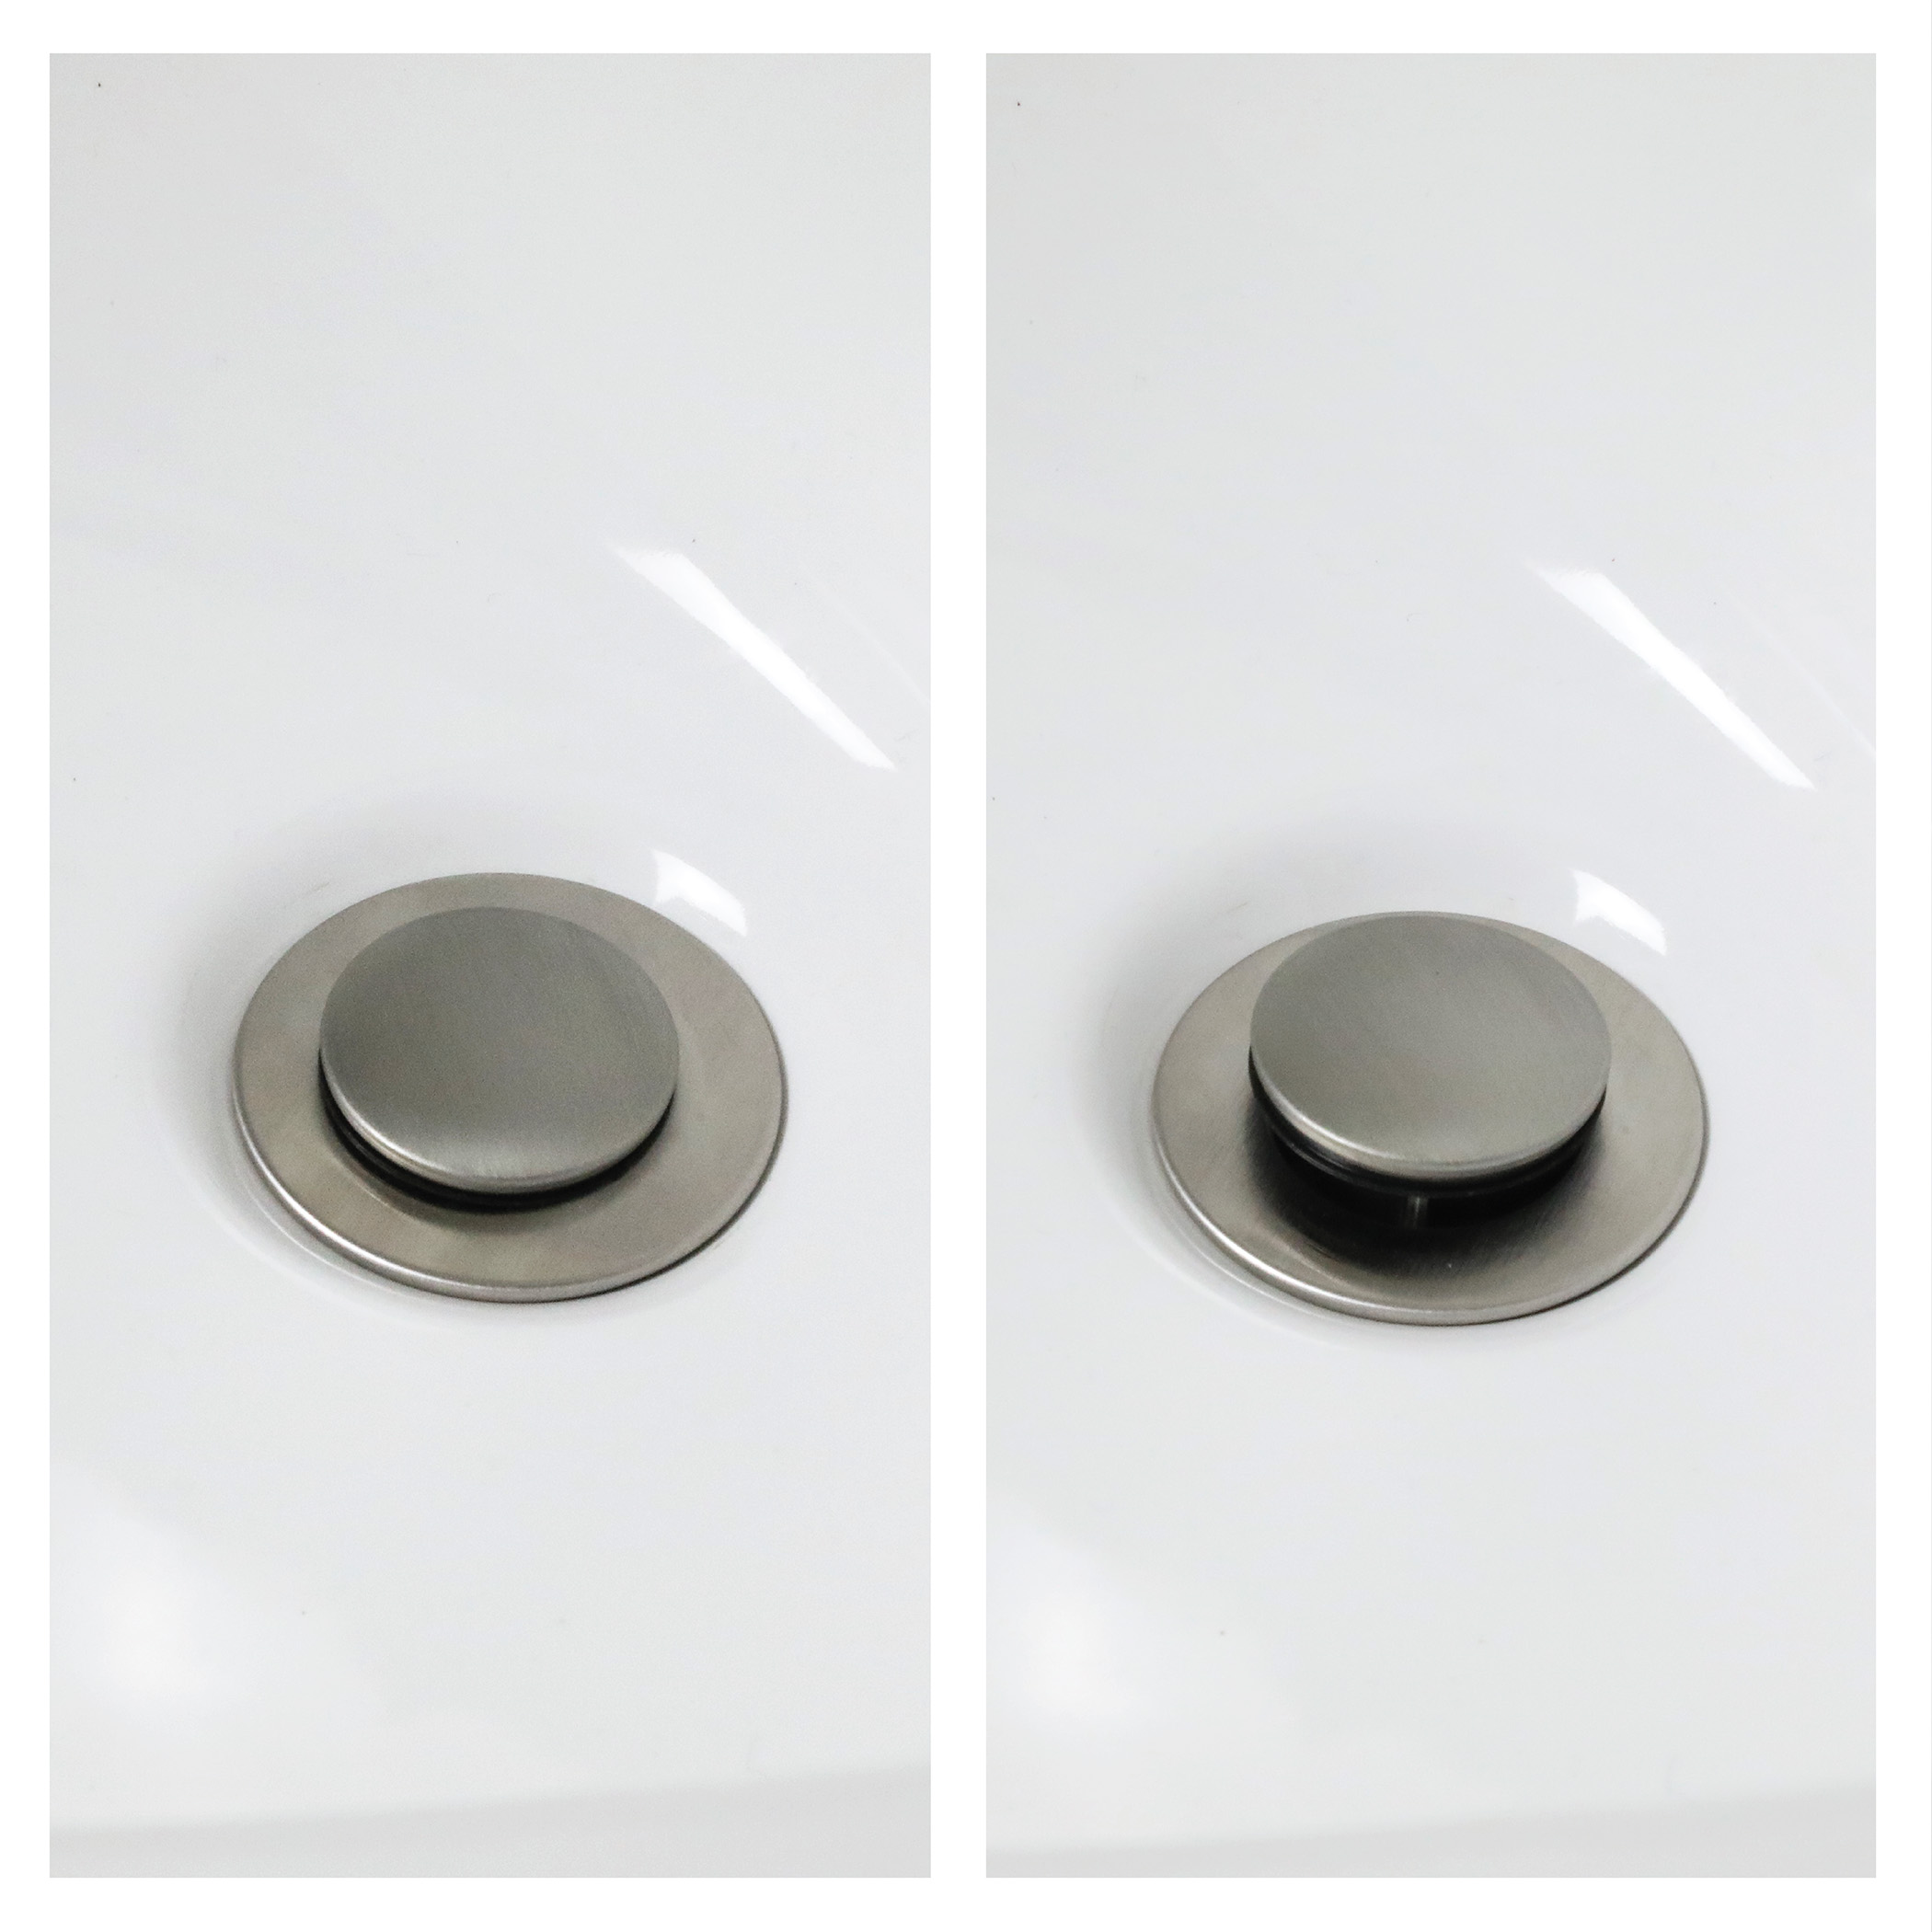 Bathroom Pop-up Stopper Replacement for Pop-up Drain Assemblies in Brushed Nickel